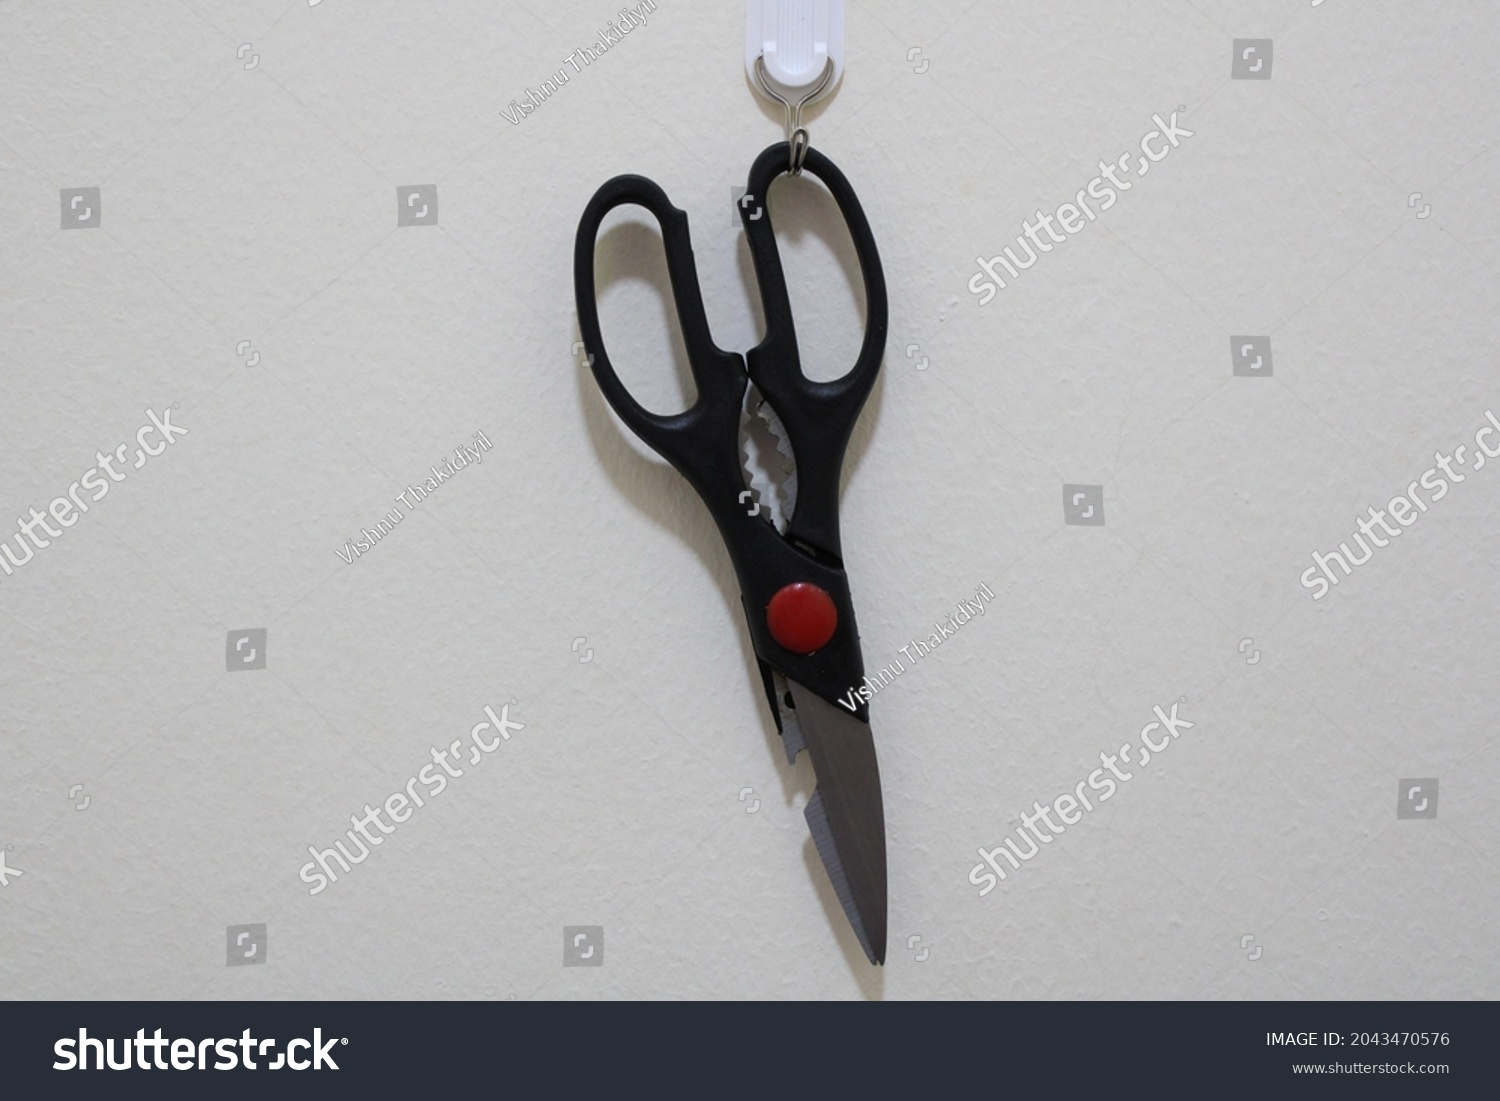 Scissors are hand-operated shearing tools. Scissors are used for cutting various thin materials, such as paper, cardboard, metal foil, cloth, rope, and wire. A large variety of scissors and shears all #2043470576